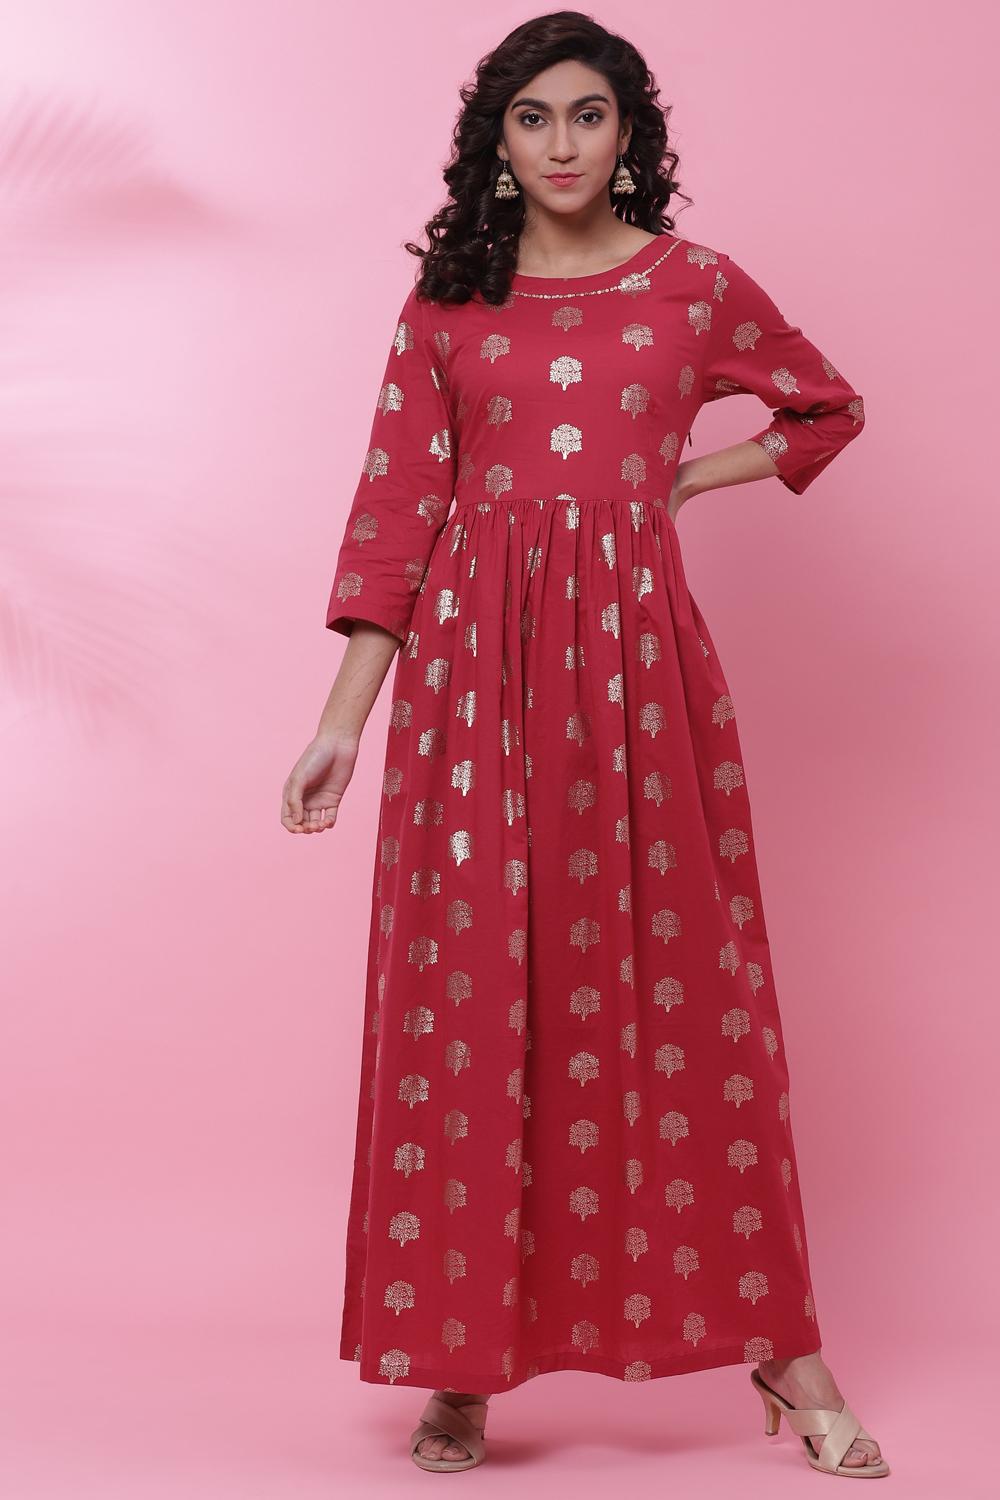 Buy Online Cherry Cotton Fusion Dress for Women & Girls at Best ...